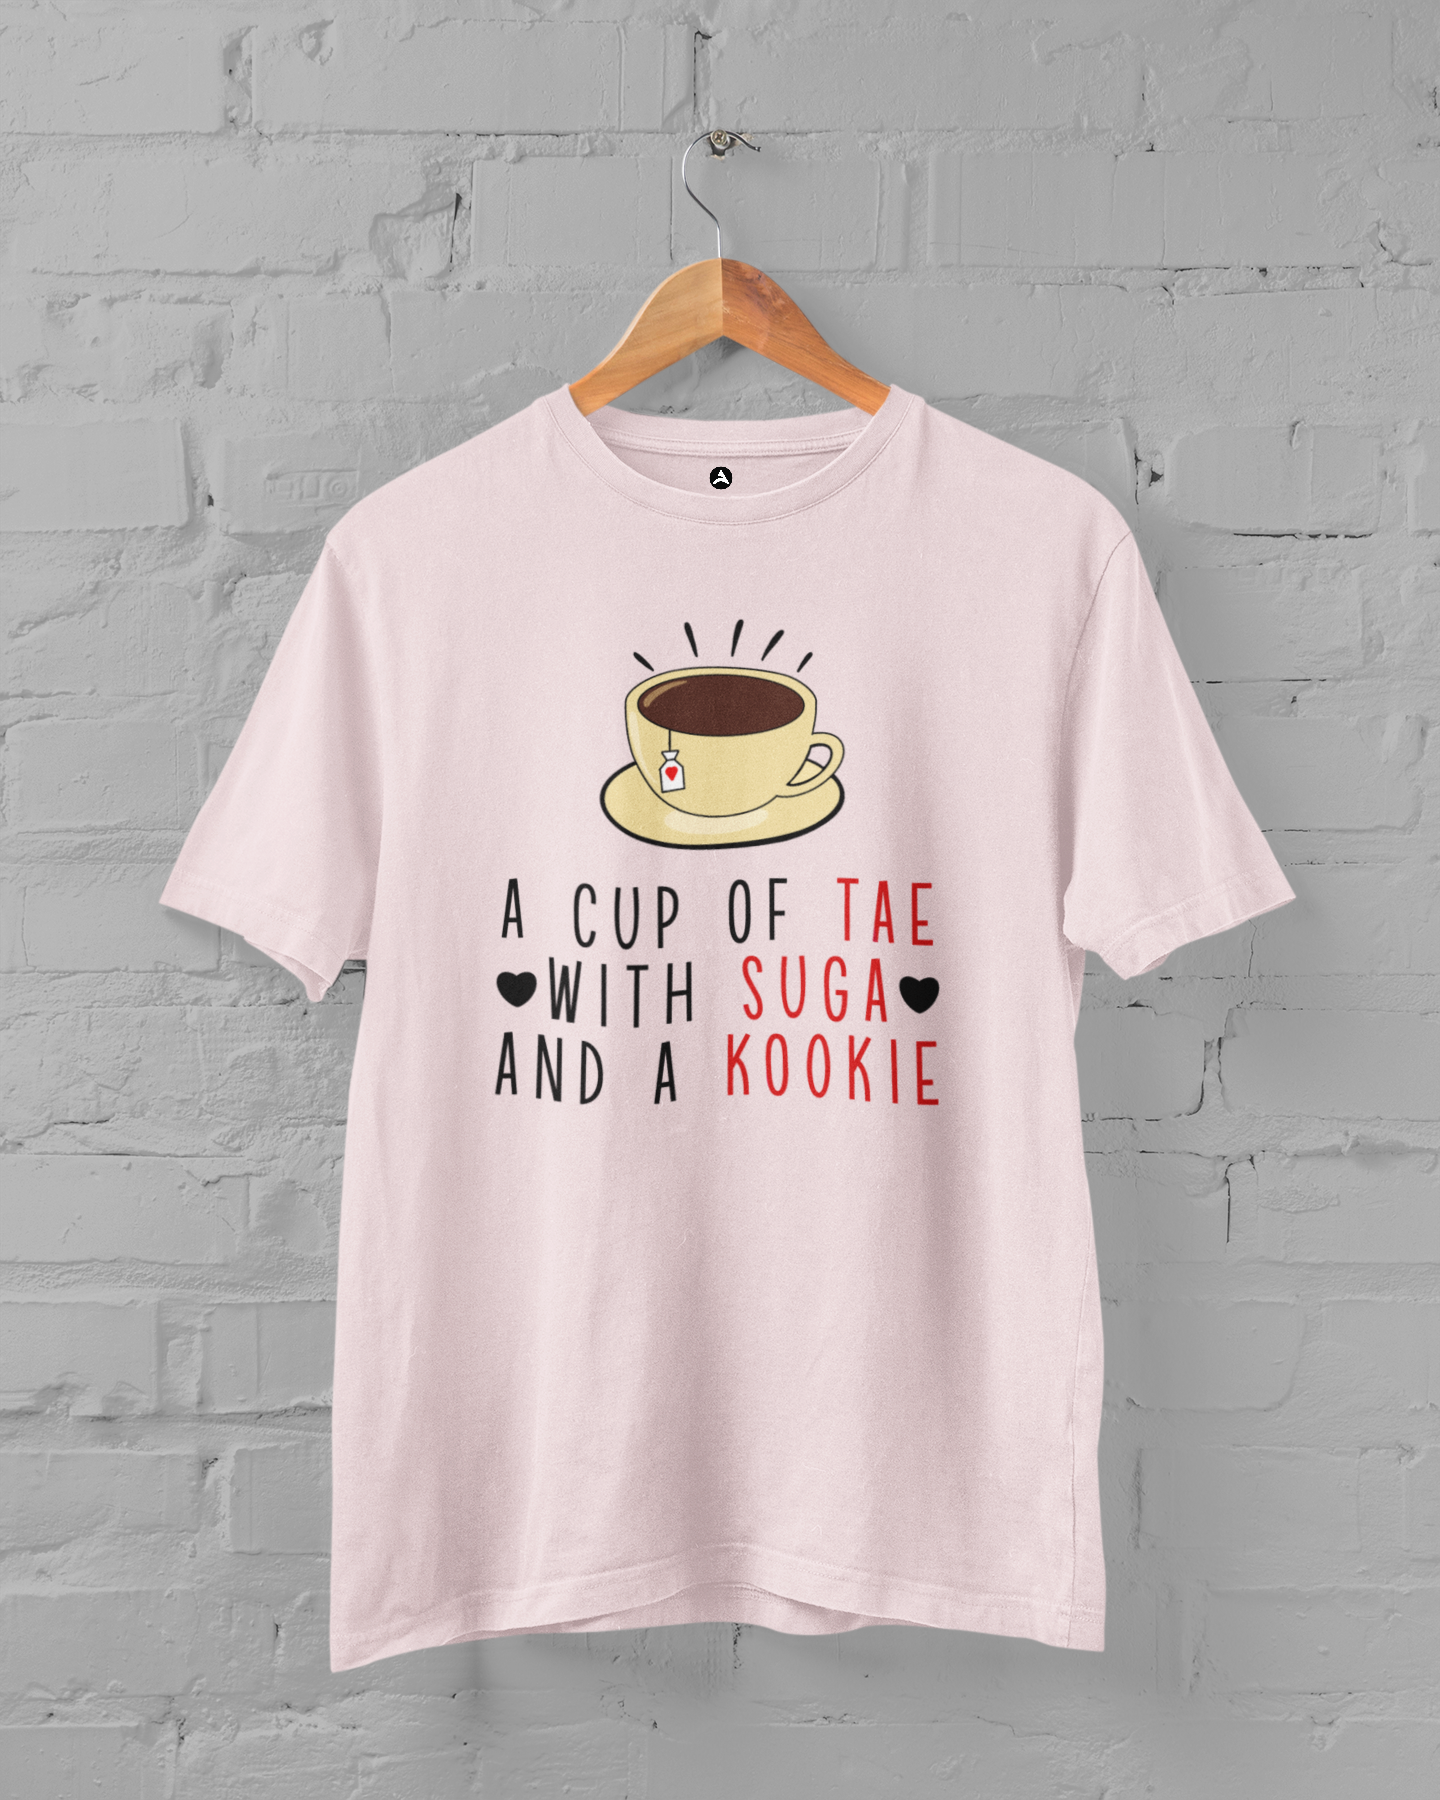 A cup of Tae: BTS - HALF-SLEEVE T-SHIRTS